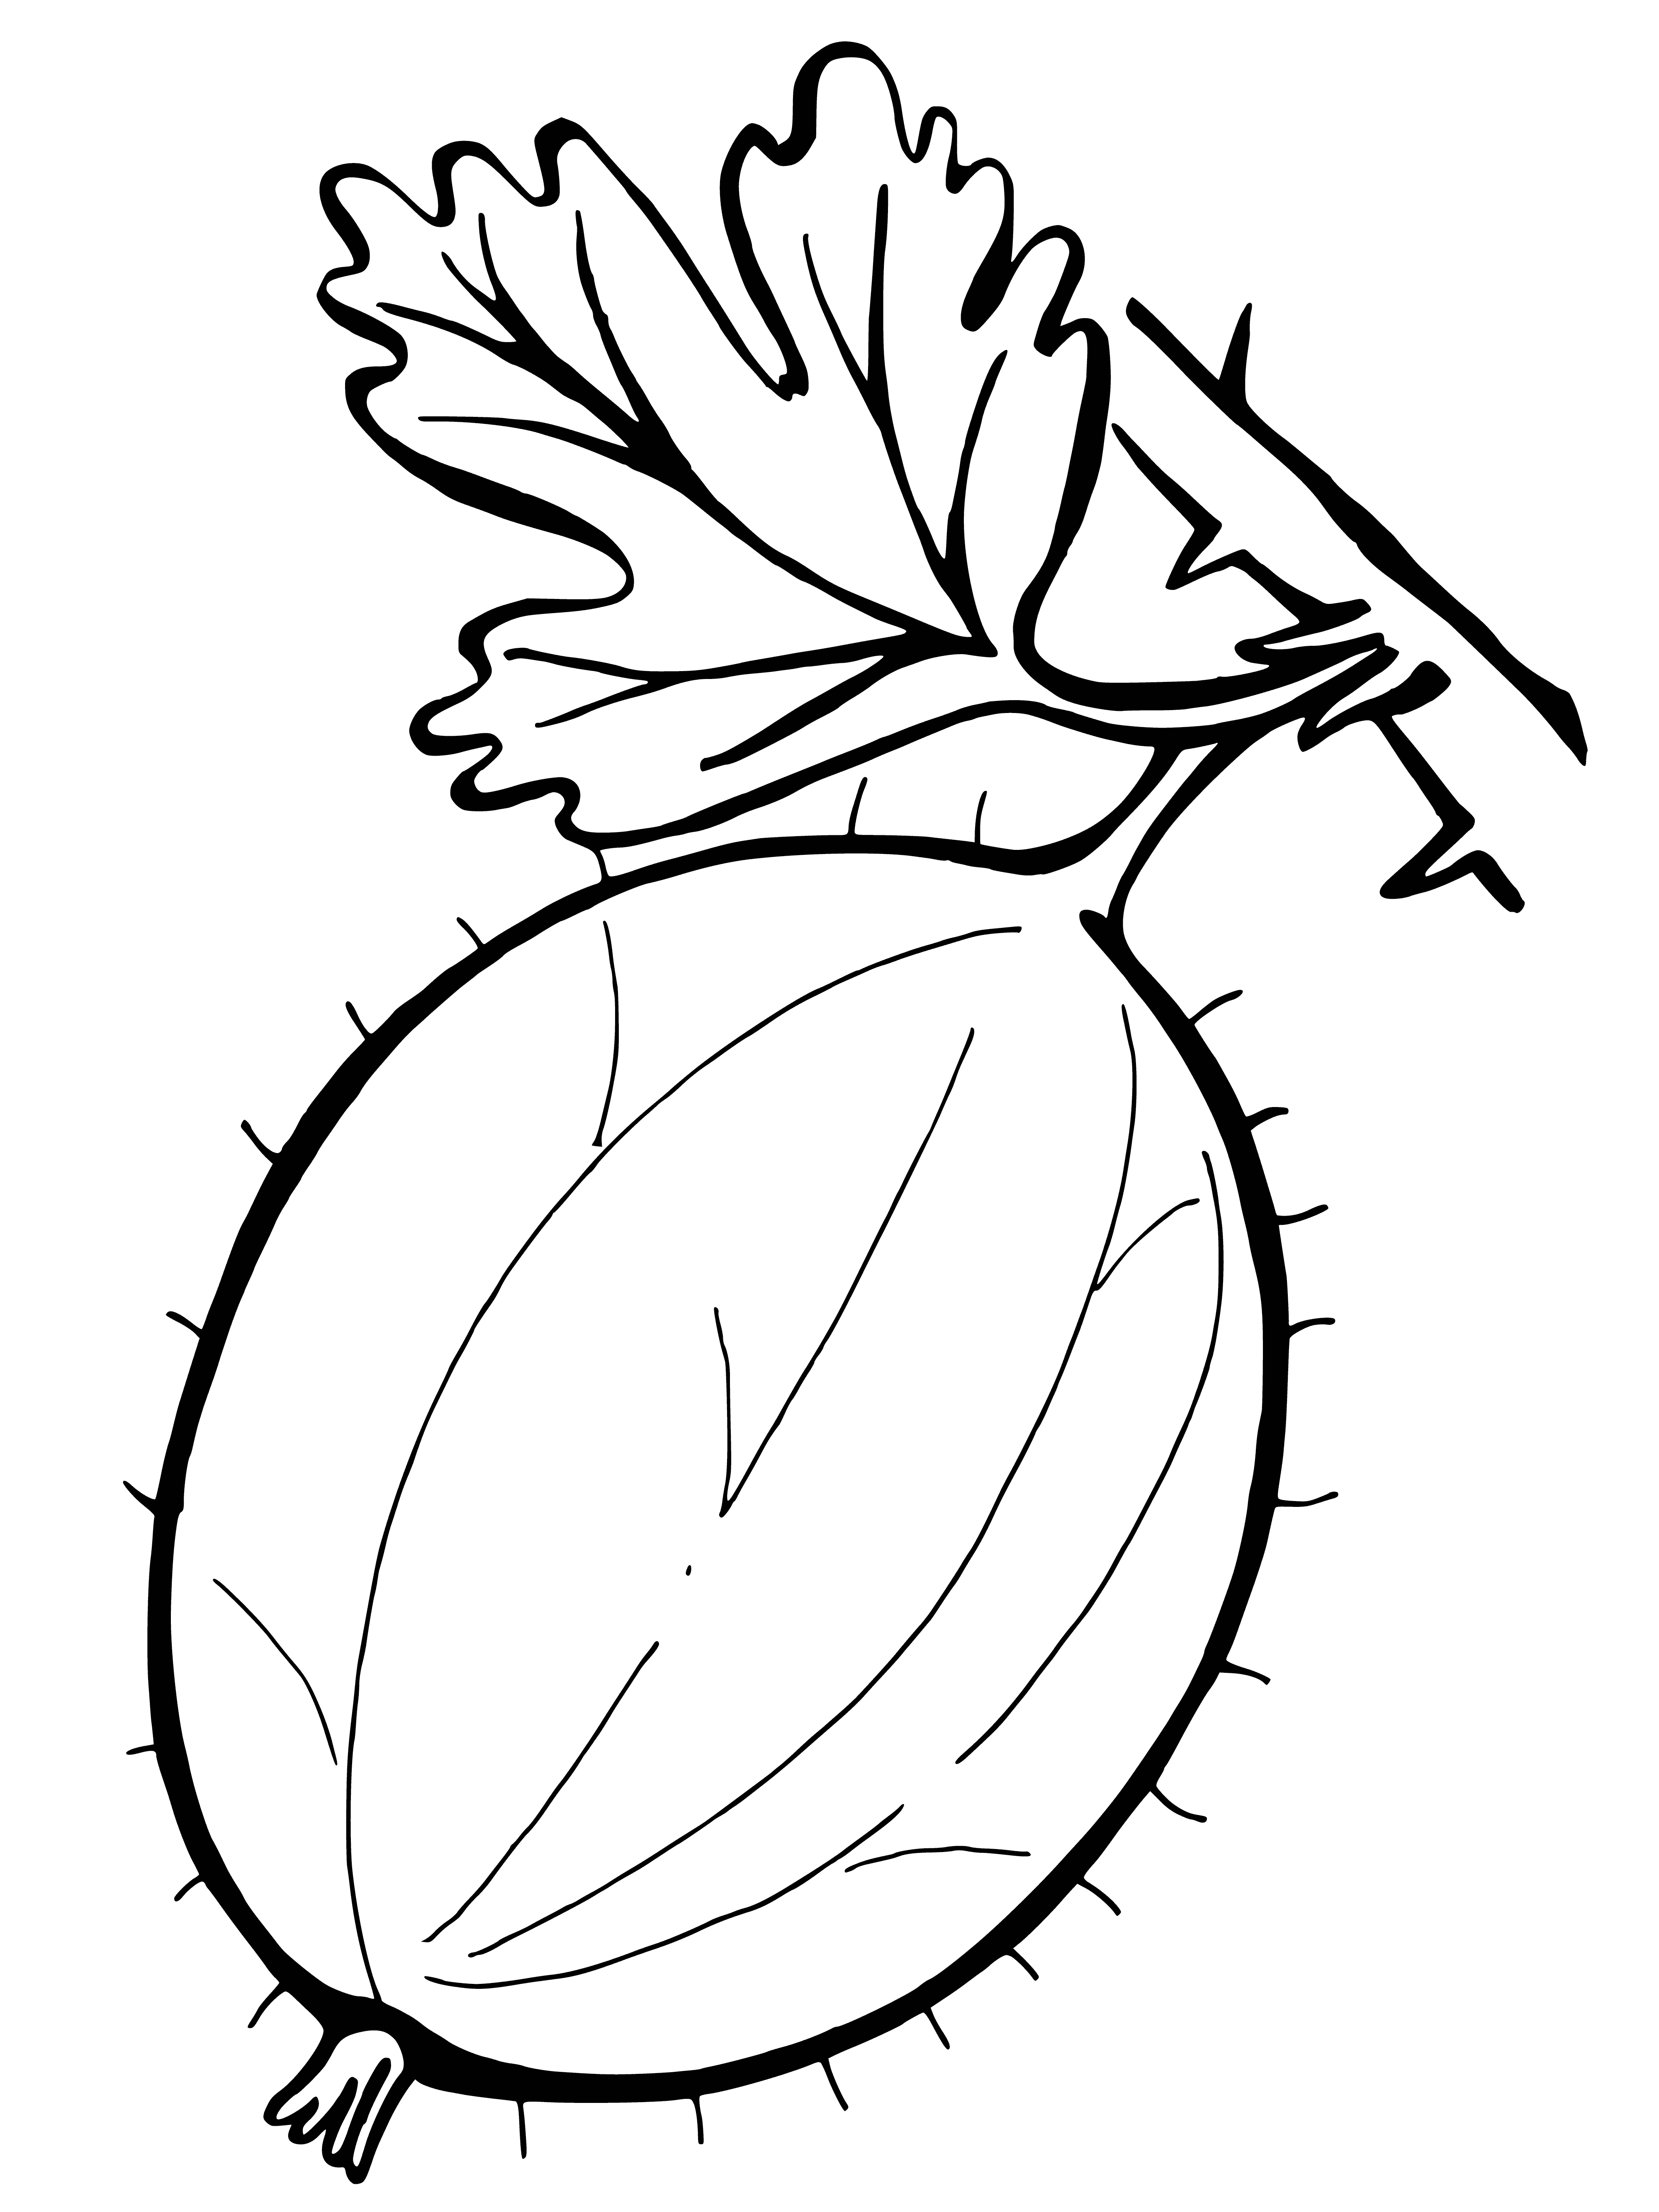 coloring page: Green berries in pairs/groups of three on thin, green stems w/small leaves; unripe, hard, slightly bumpy skin & a sour, astringent taste.